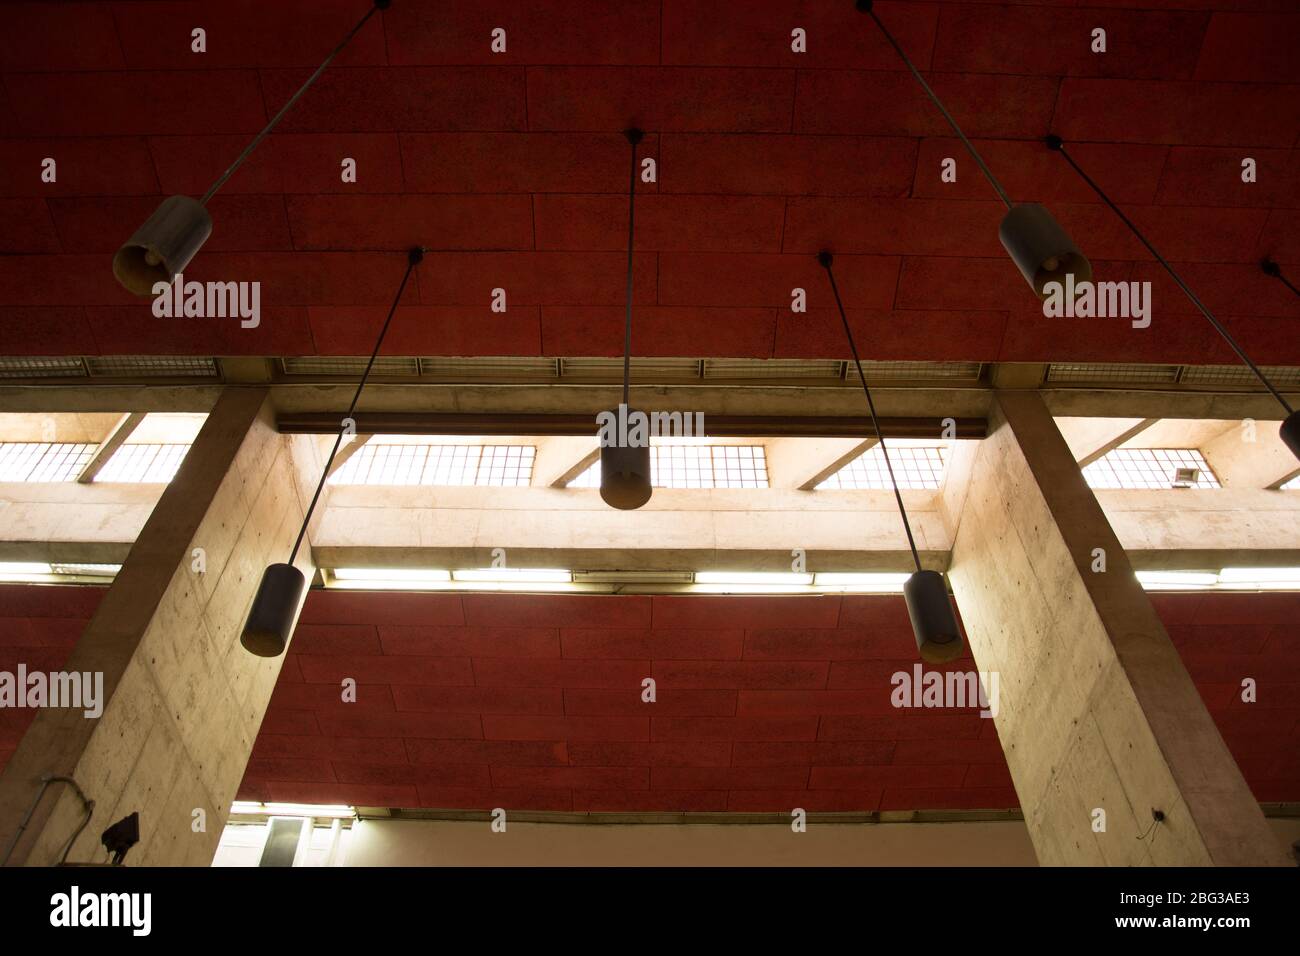 Hanging cylindrical round lights from the red ceiling Stock Photo